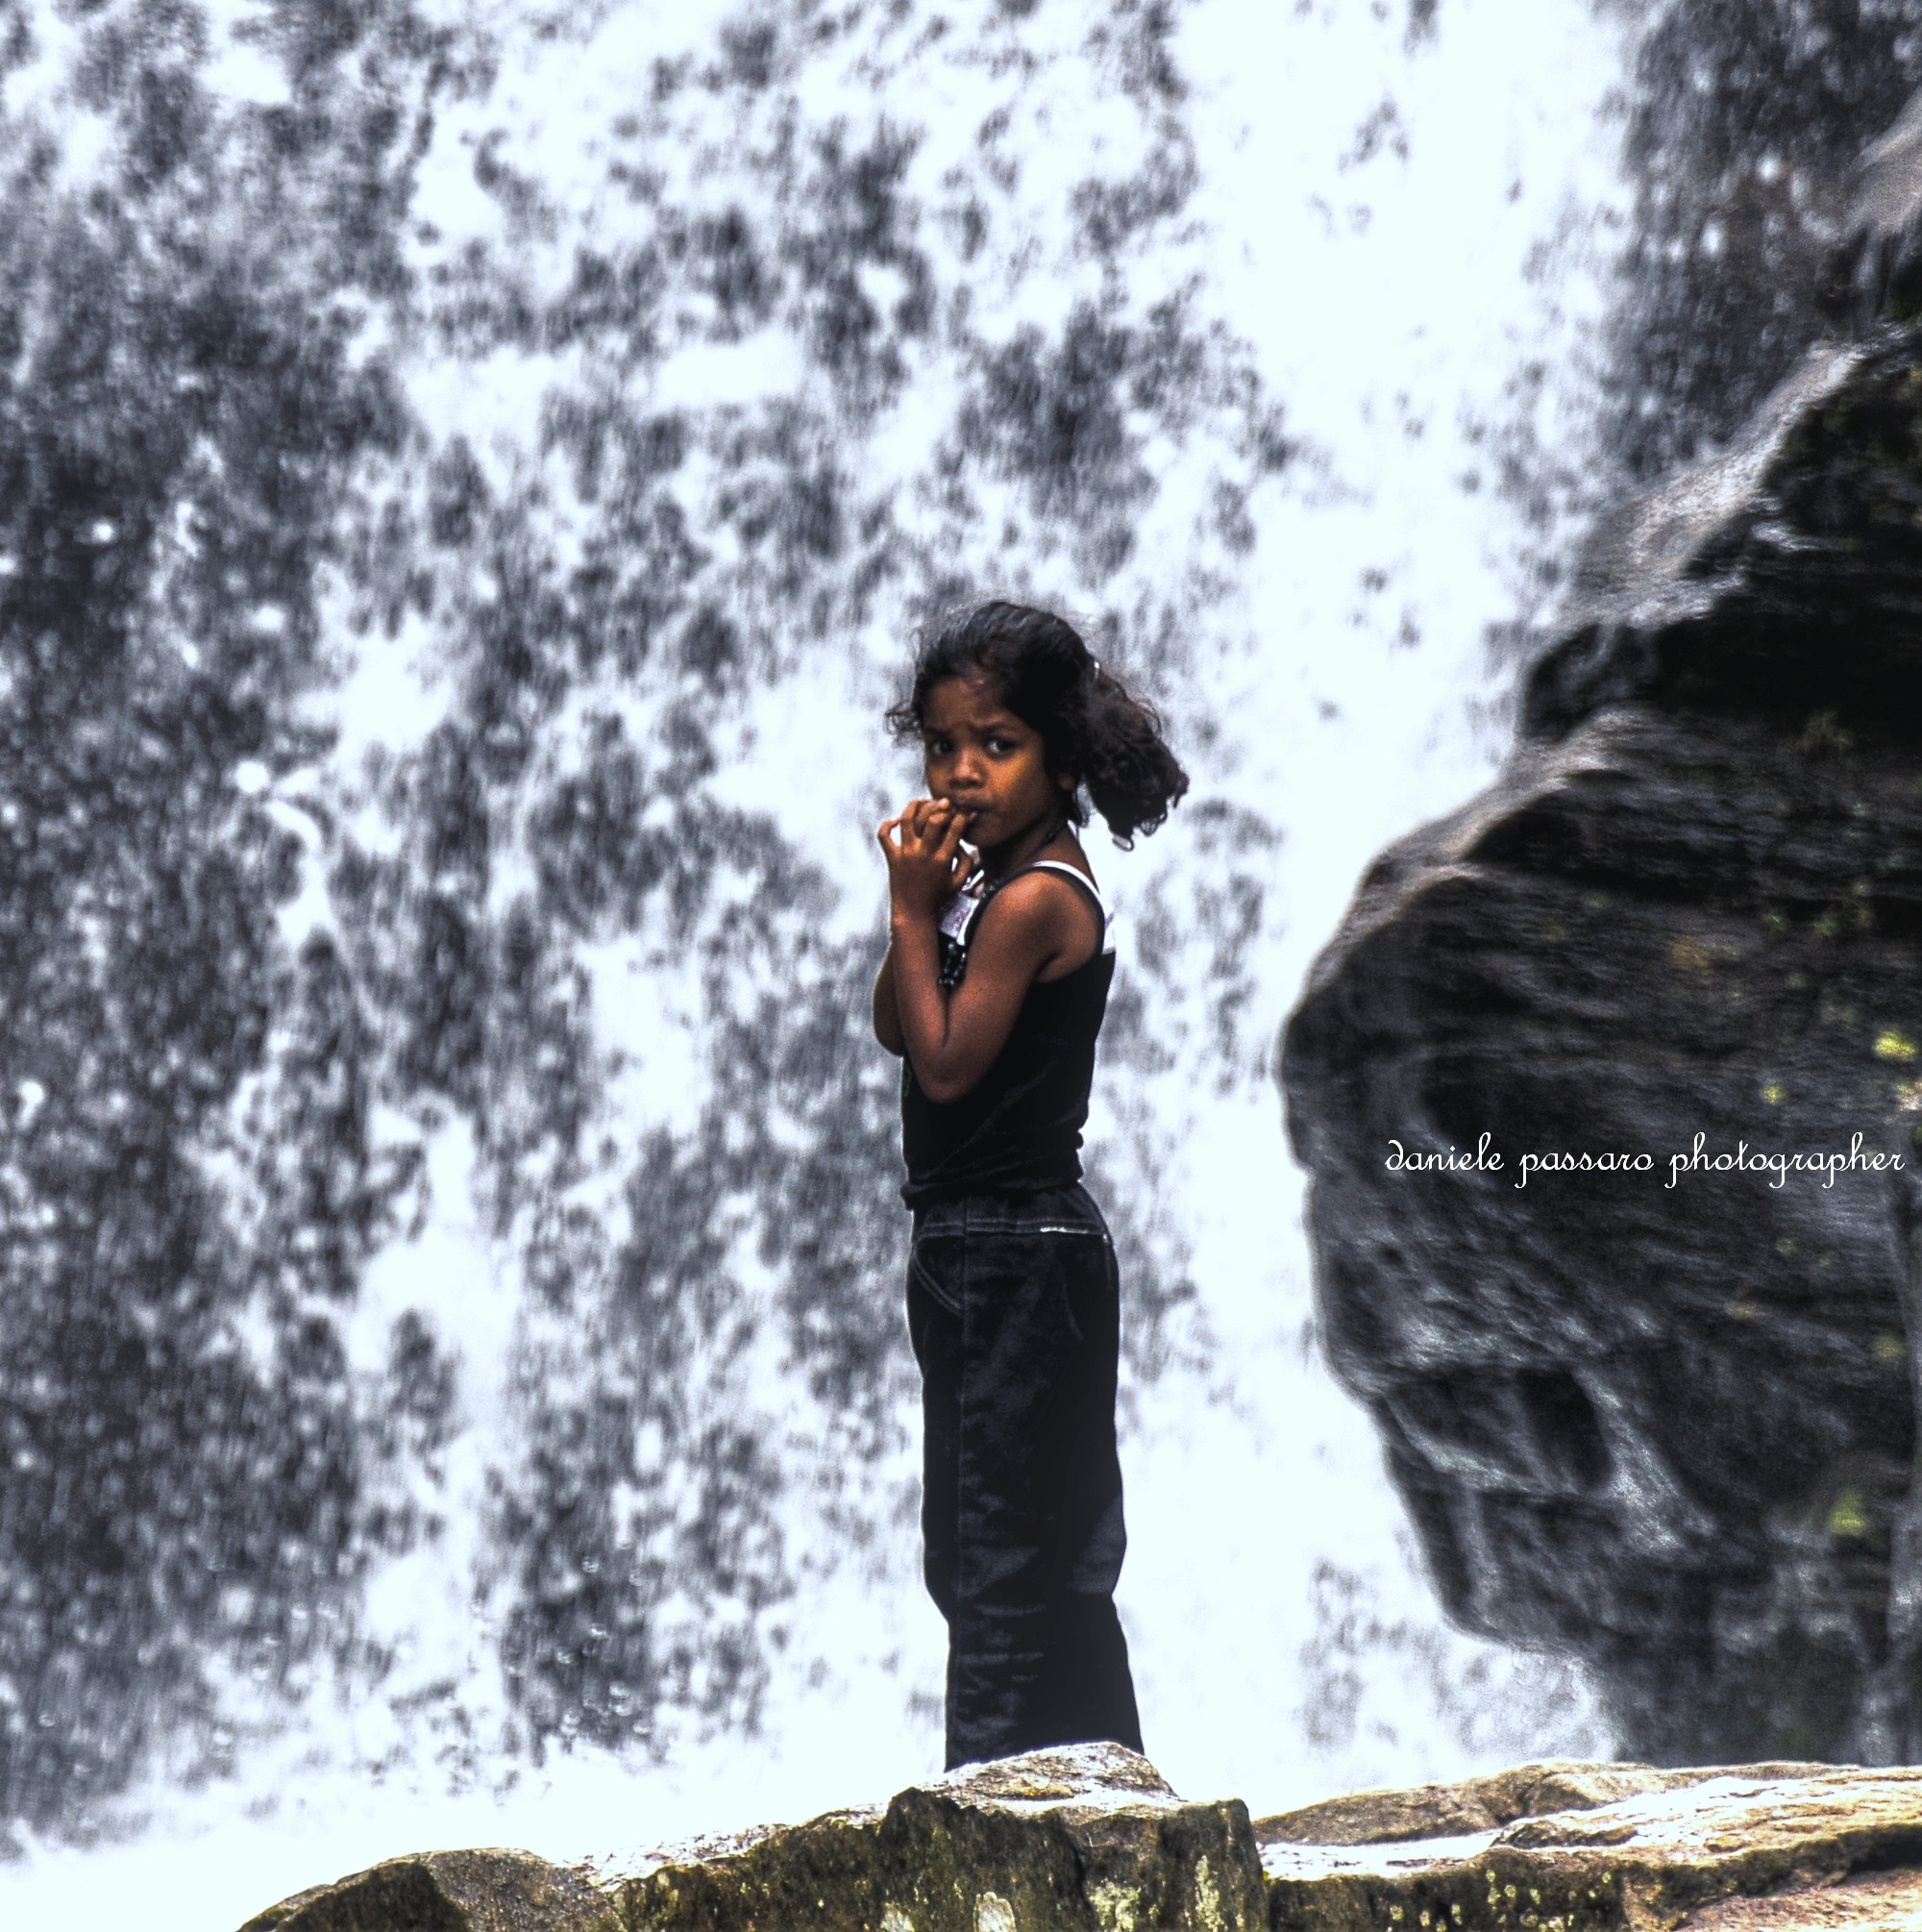 The girl and the waterfall...